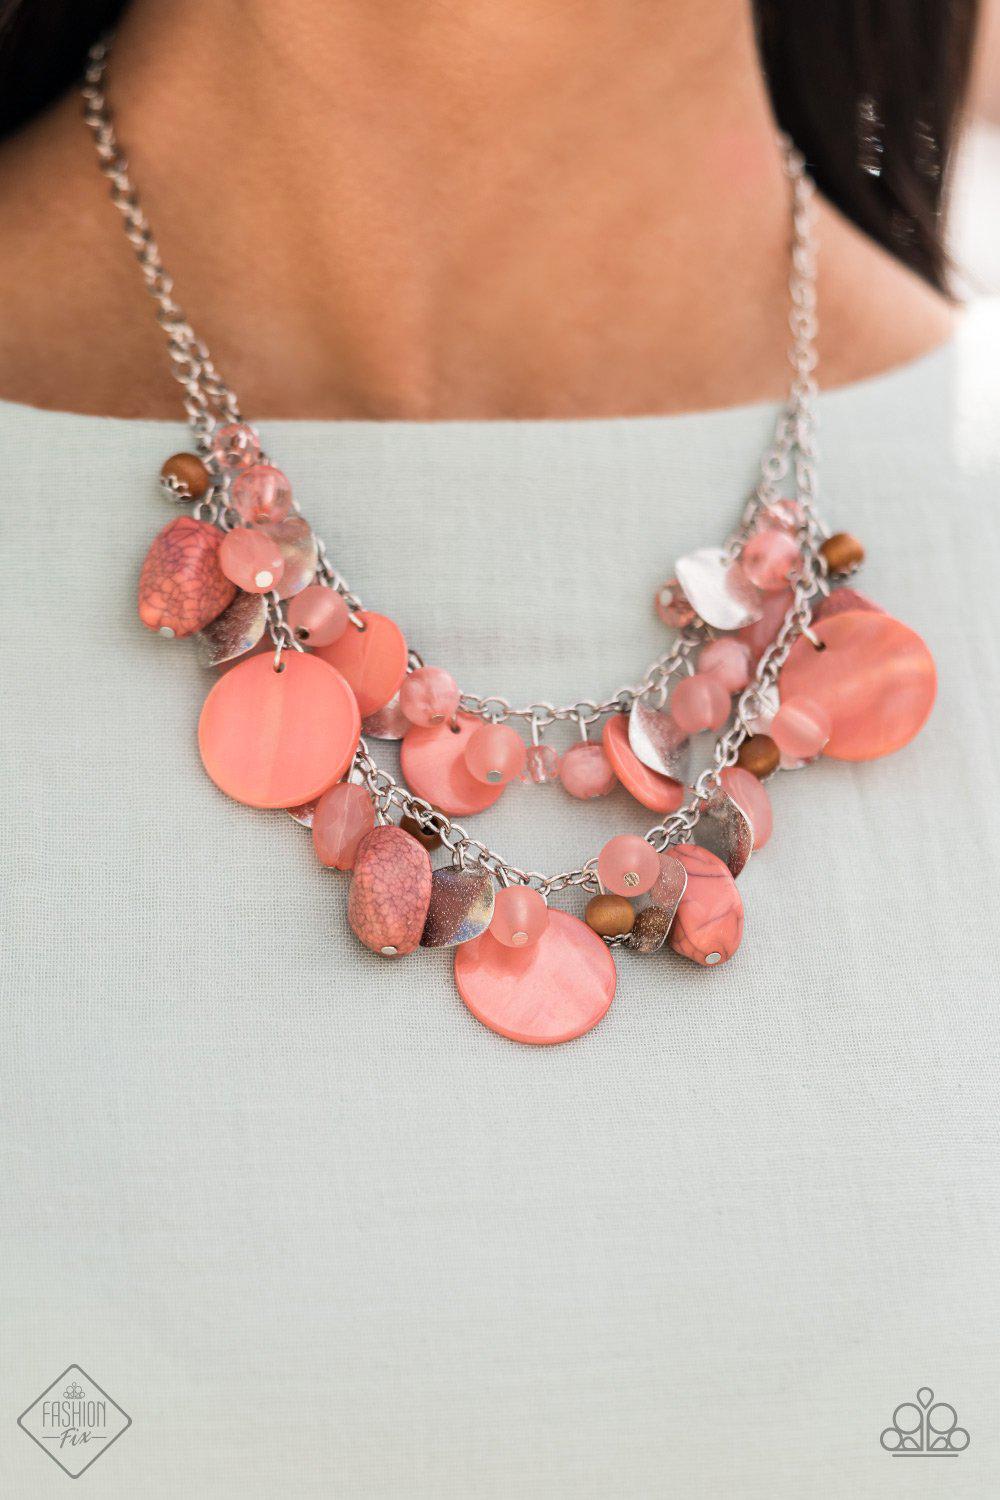 Spring Goddess Coral Bead, Stone and Wood Necklace - Paparazzi Accessories- model - CarasShop.com - $5 Jewelry by Cara Jewels